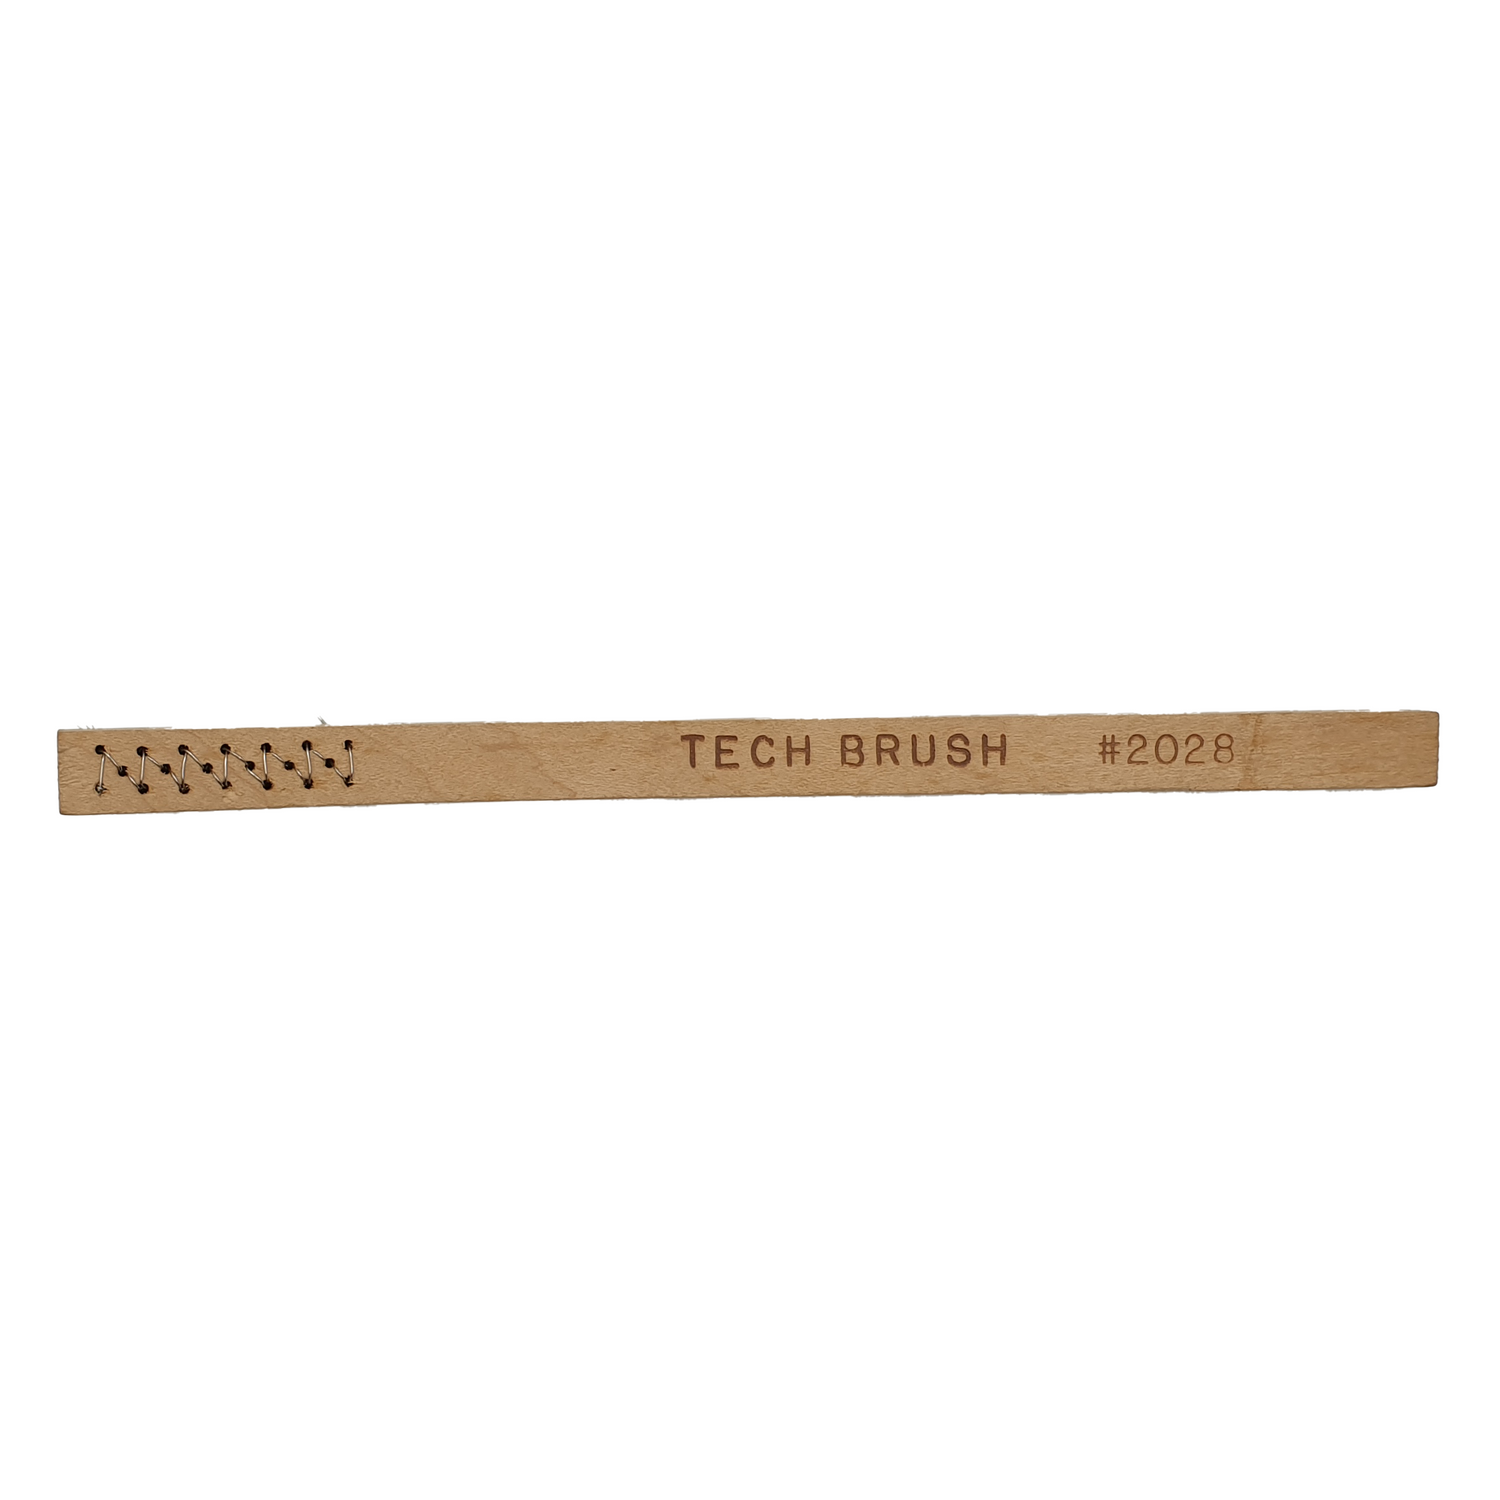 Techspray 2028-1 wooden general cleaning brush ESD safe antistatic to clean and coat printed circuit boards